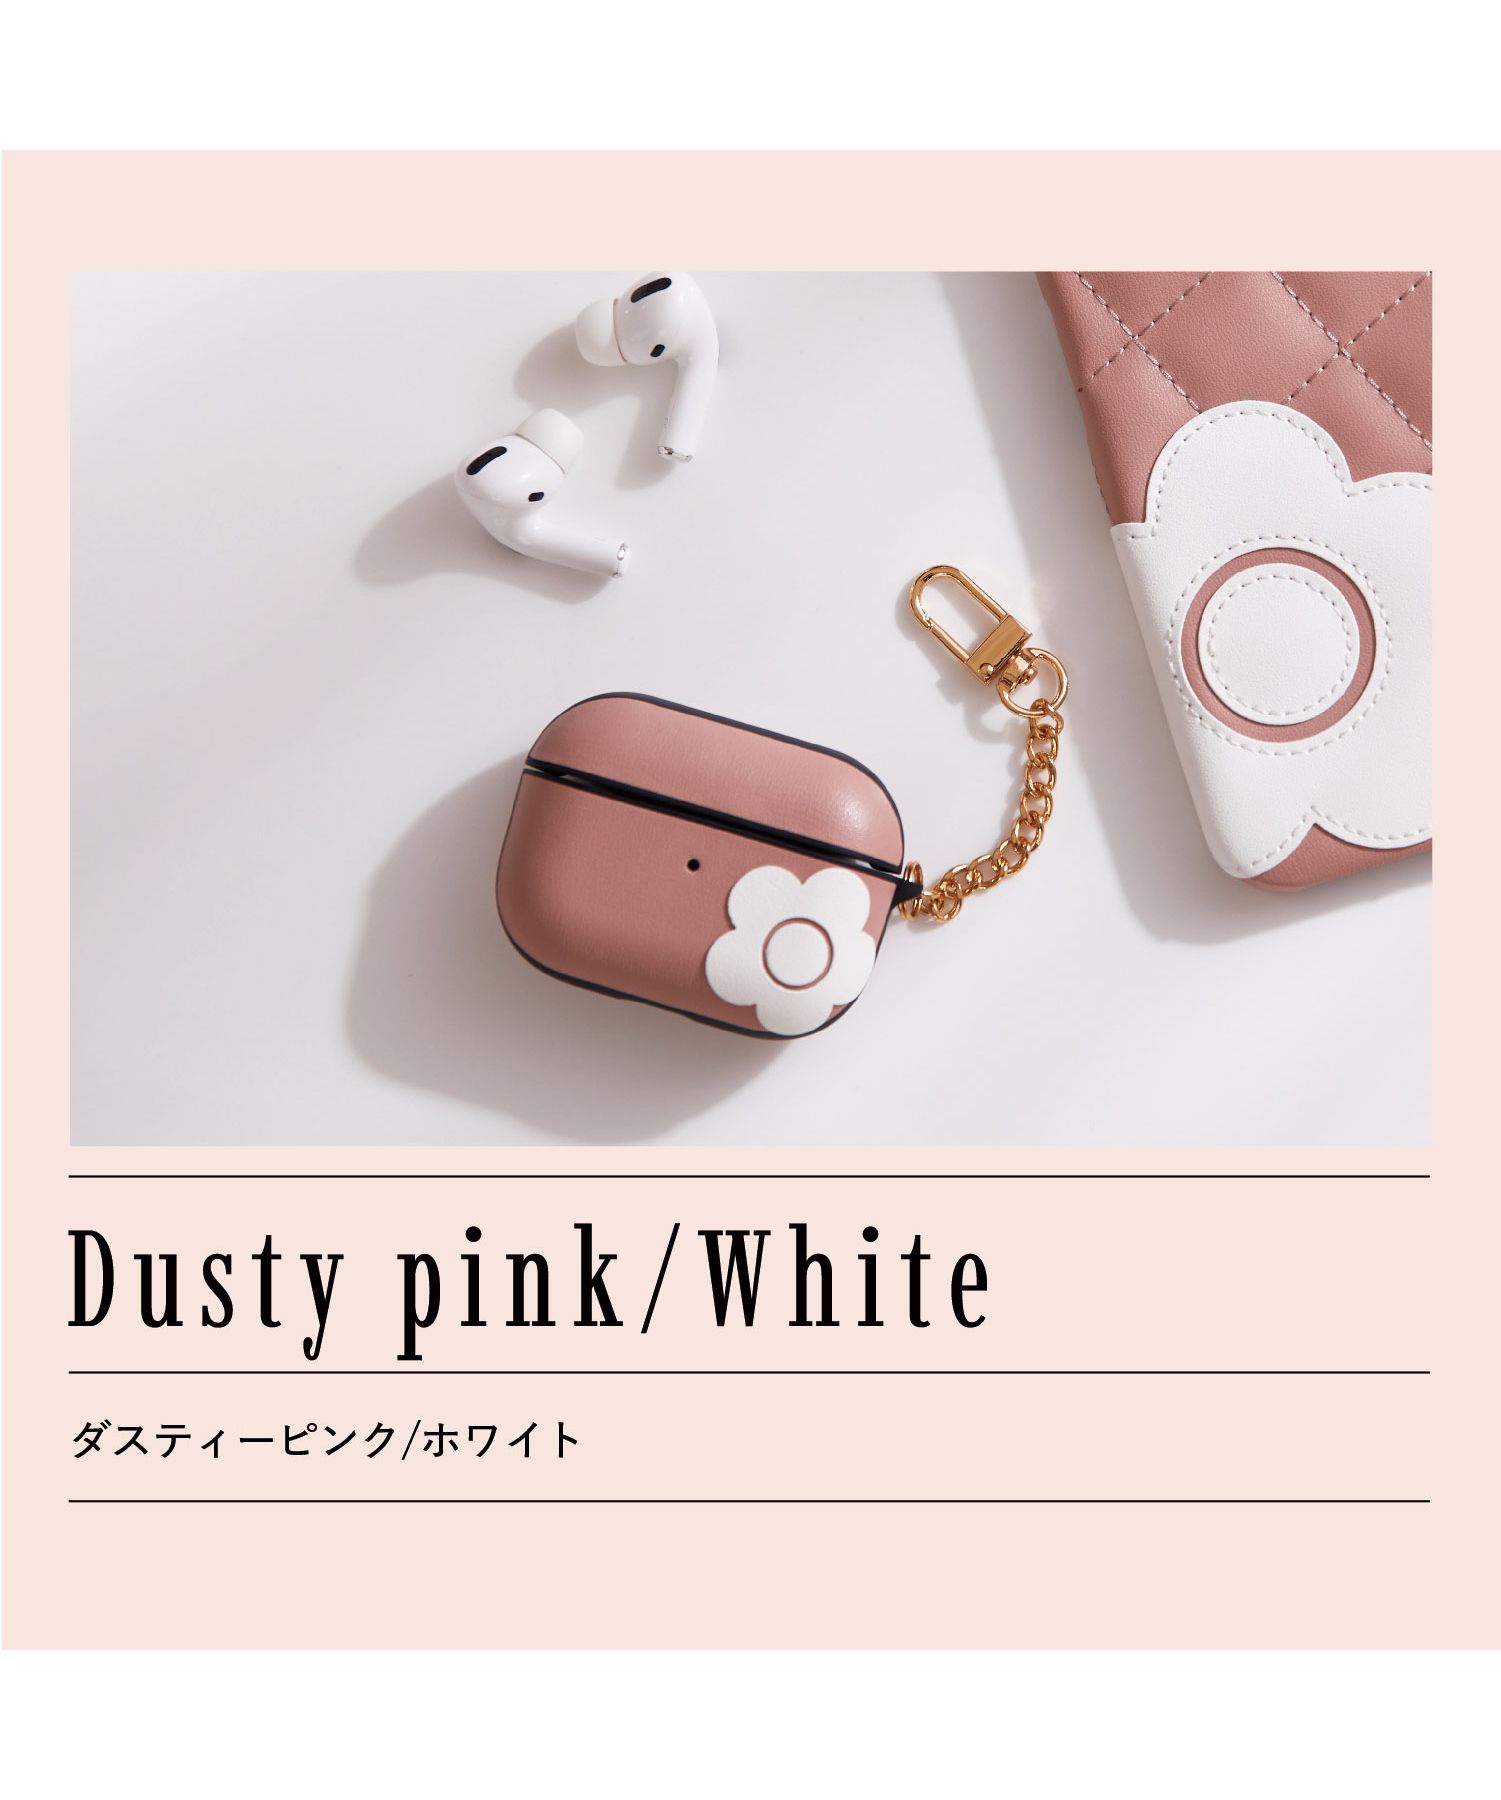 MARY QUANT マリークヮント エアーポッズプロ AirPods Proケース